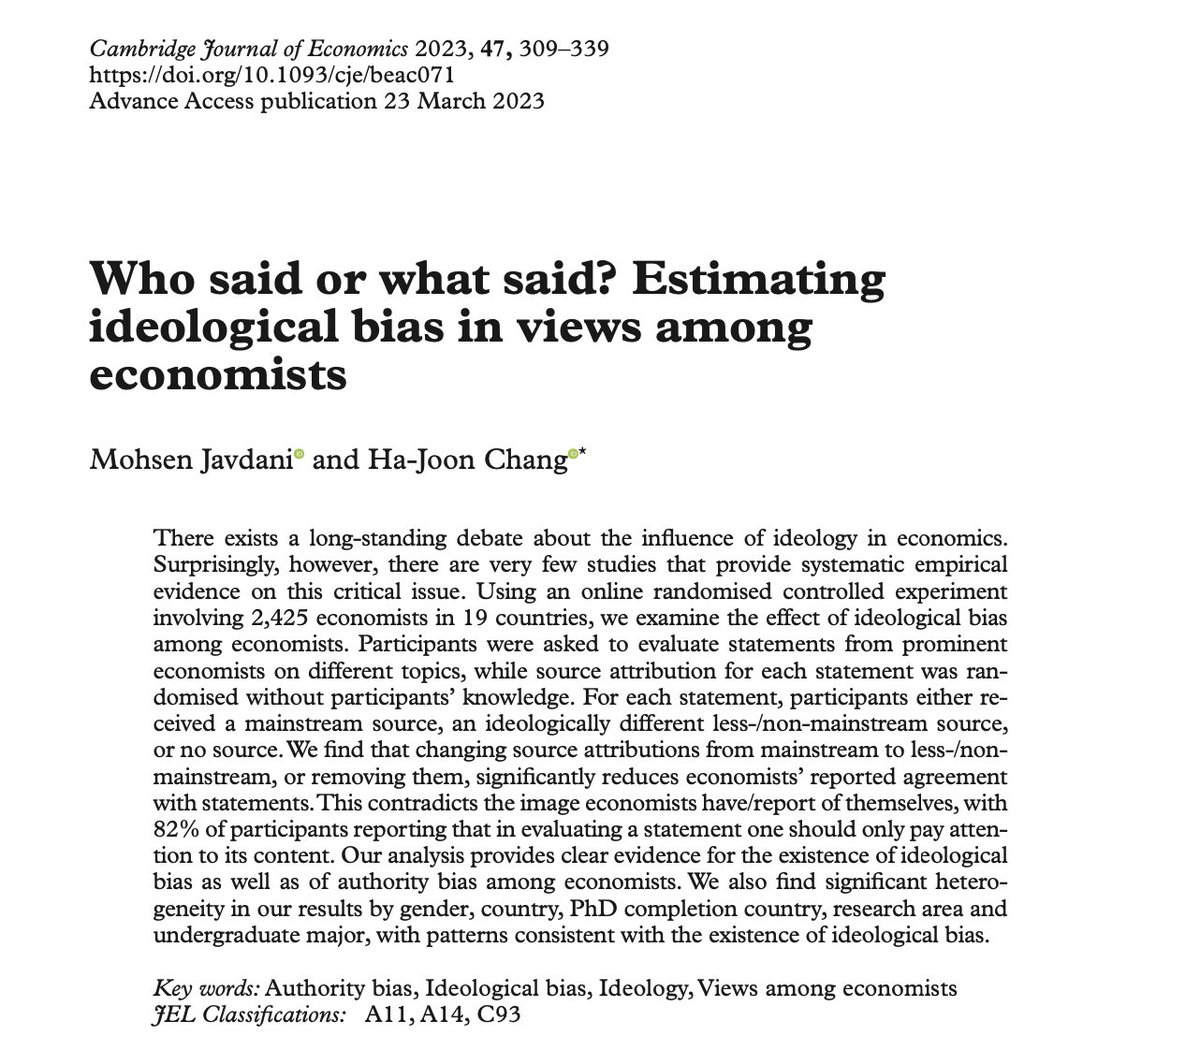 Ideological bias and authority bias by economists: 'changing source attributions from mainstream to less/non-mainstream, or removing them, reduces economists’ agreement with statements. This contradicts... that in evaluating a statement one should only pay attention to content'